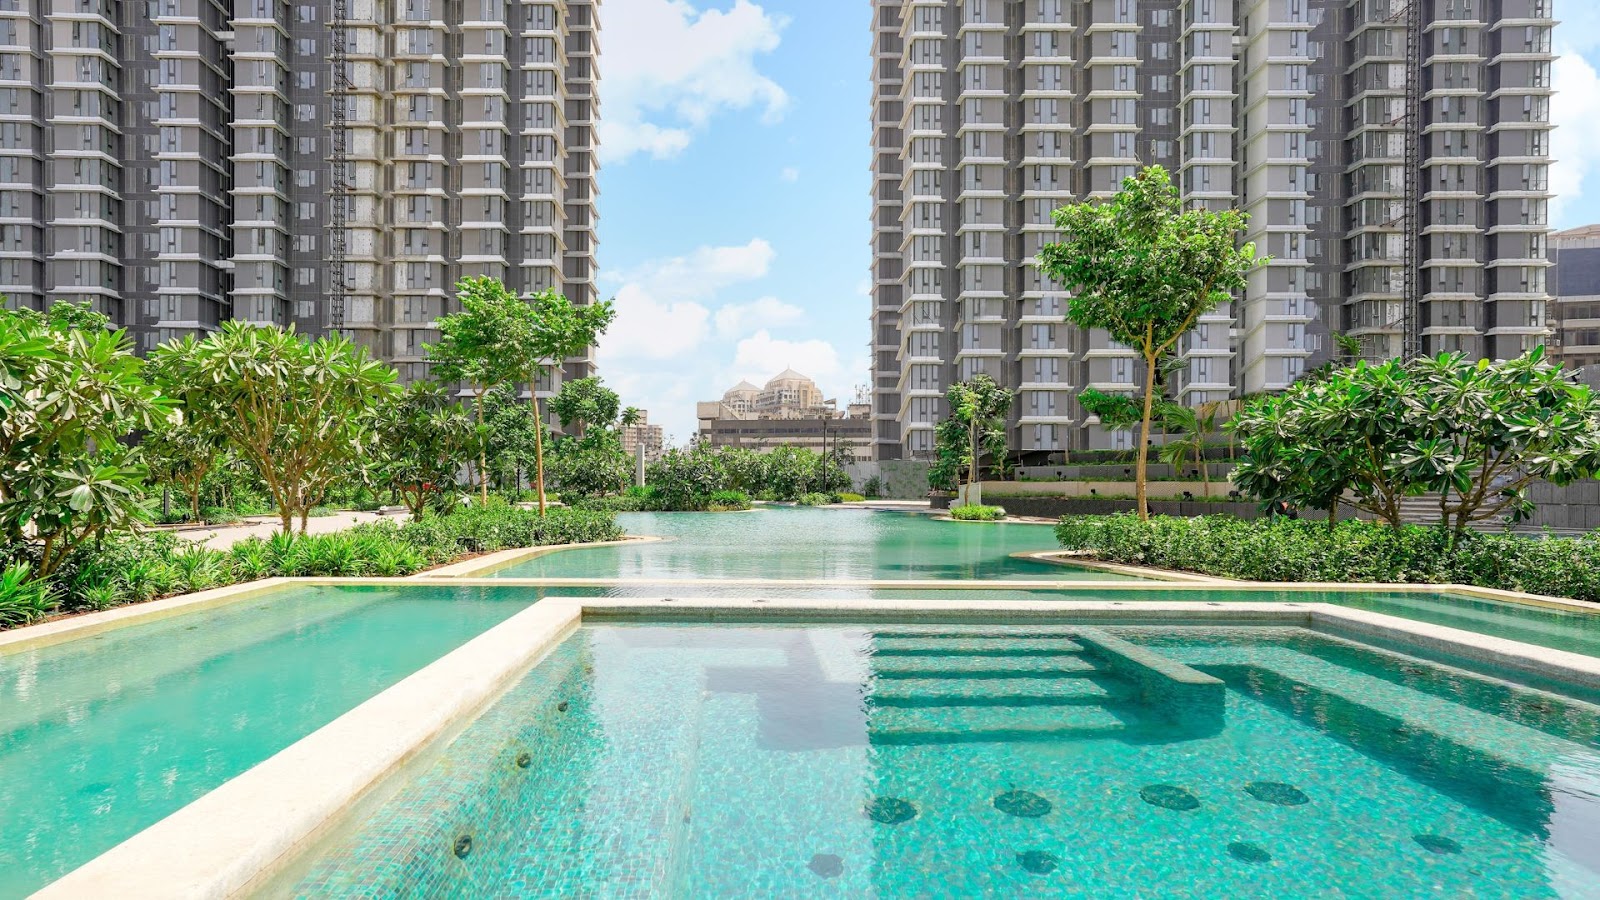 Live the legendary life in Lodha ParkSide